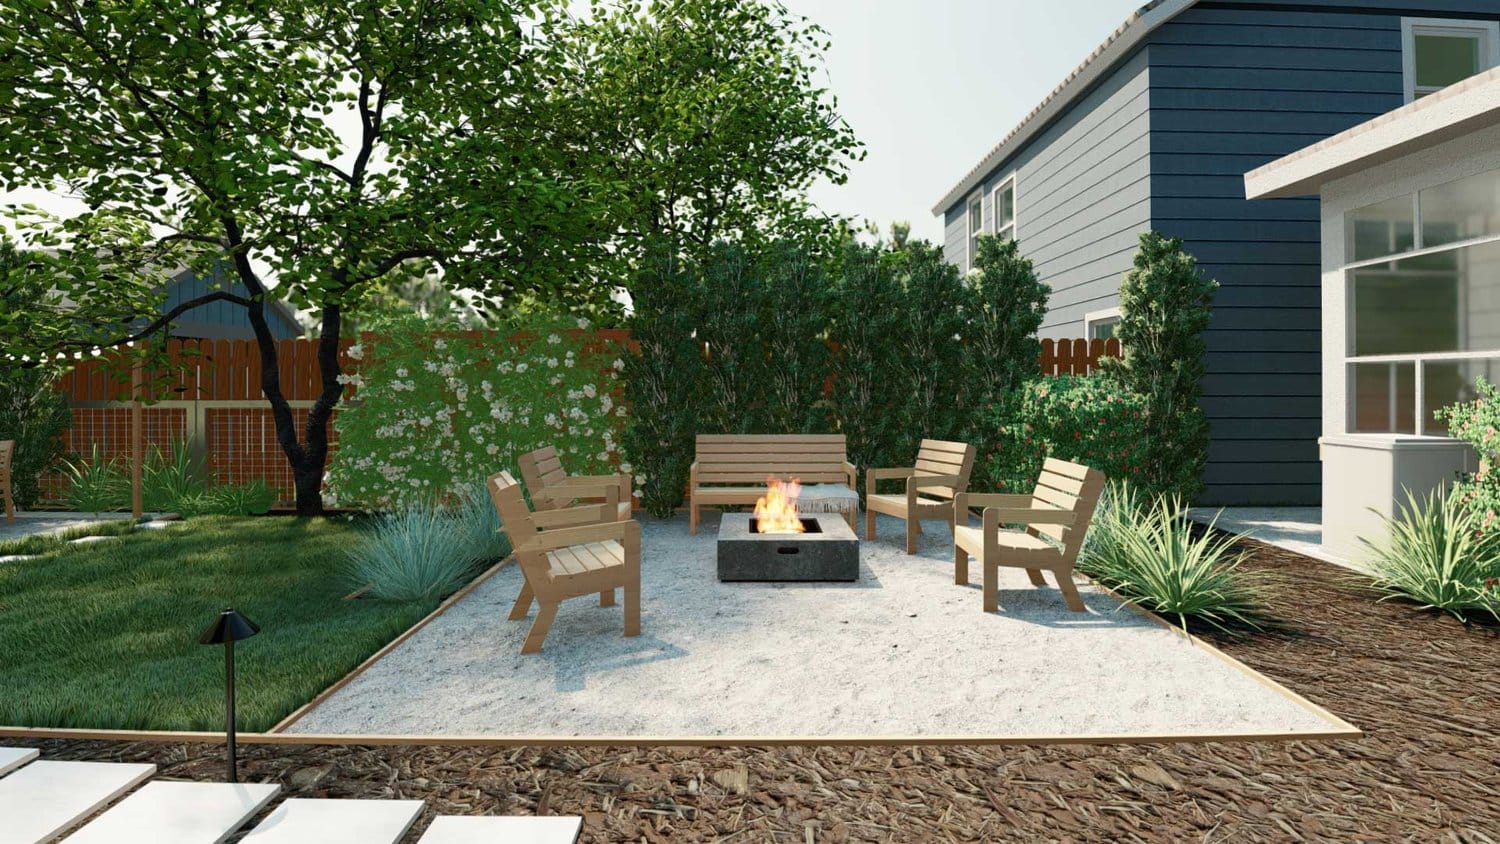 Arlington backyard with fire pit seating area, lawn, trees and plant